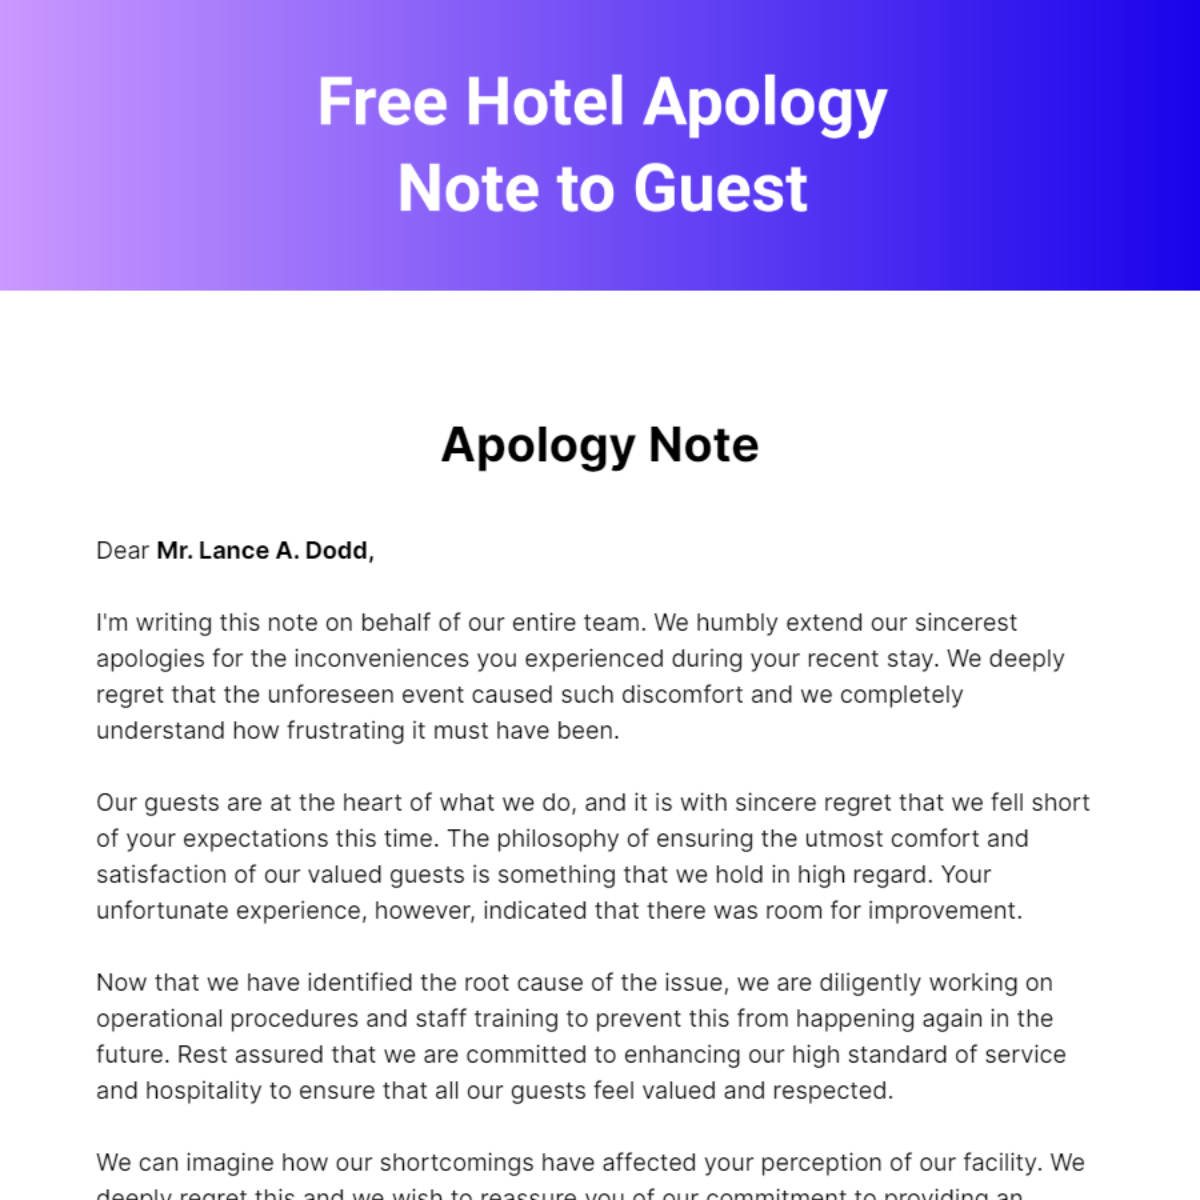 Free Hotel Apology Note to Guest Template